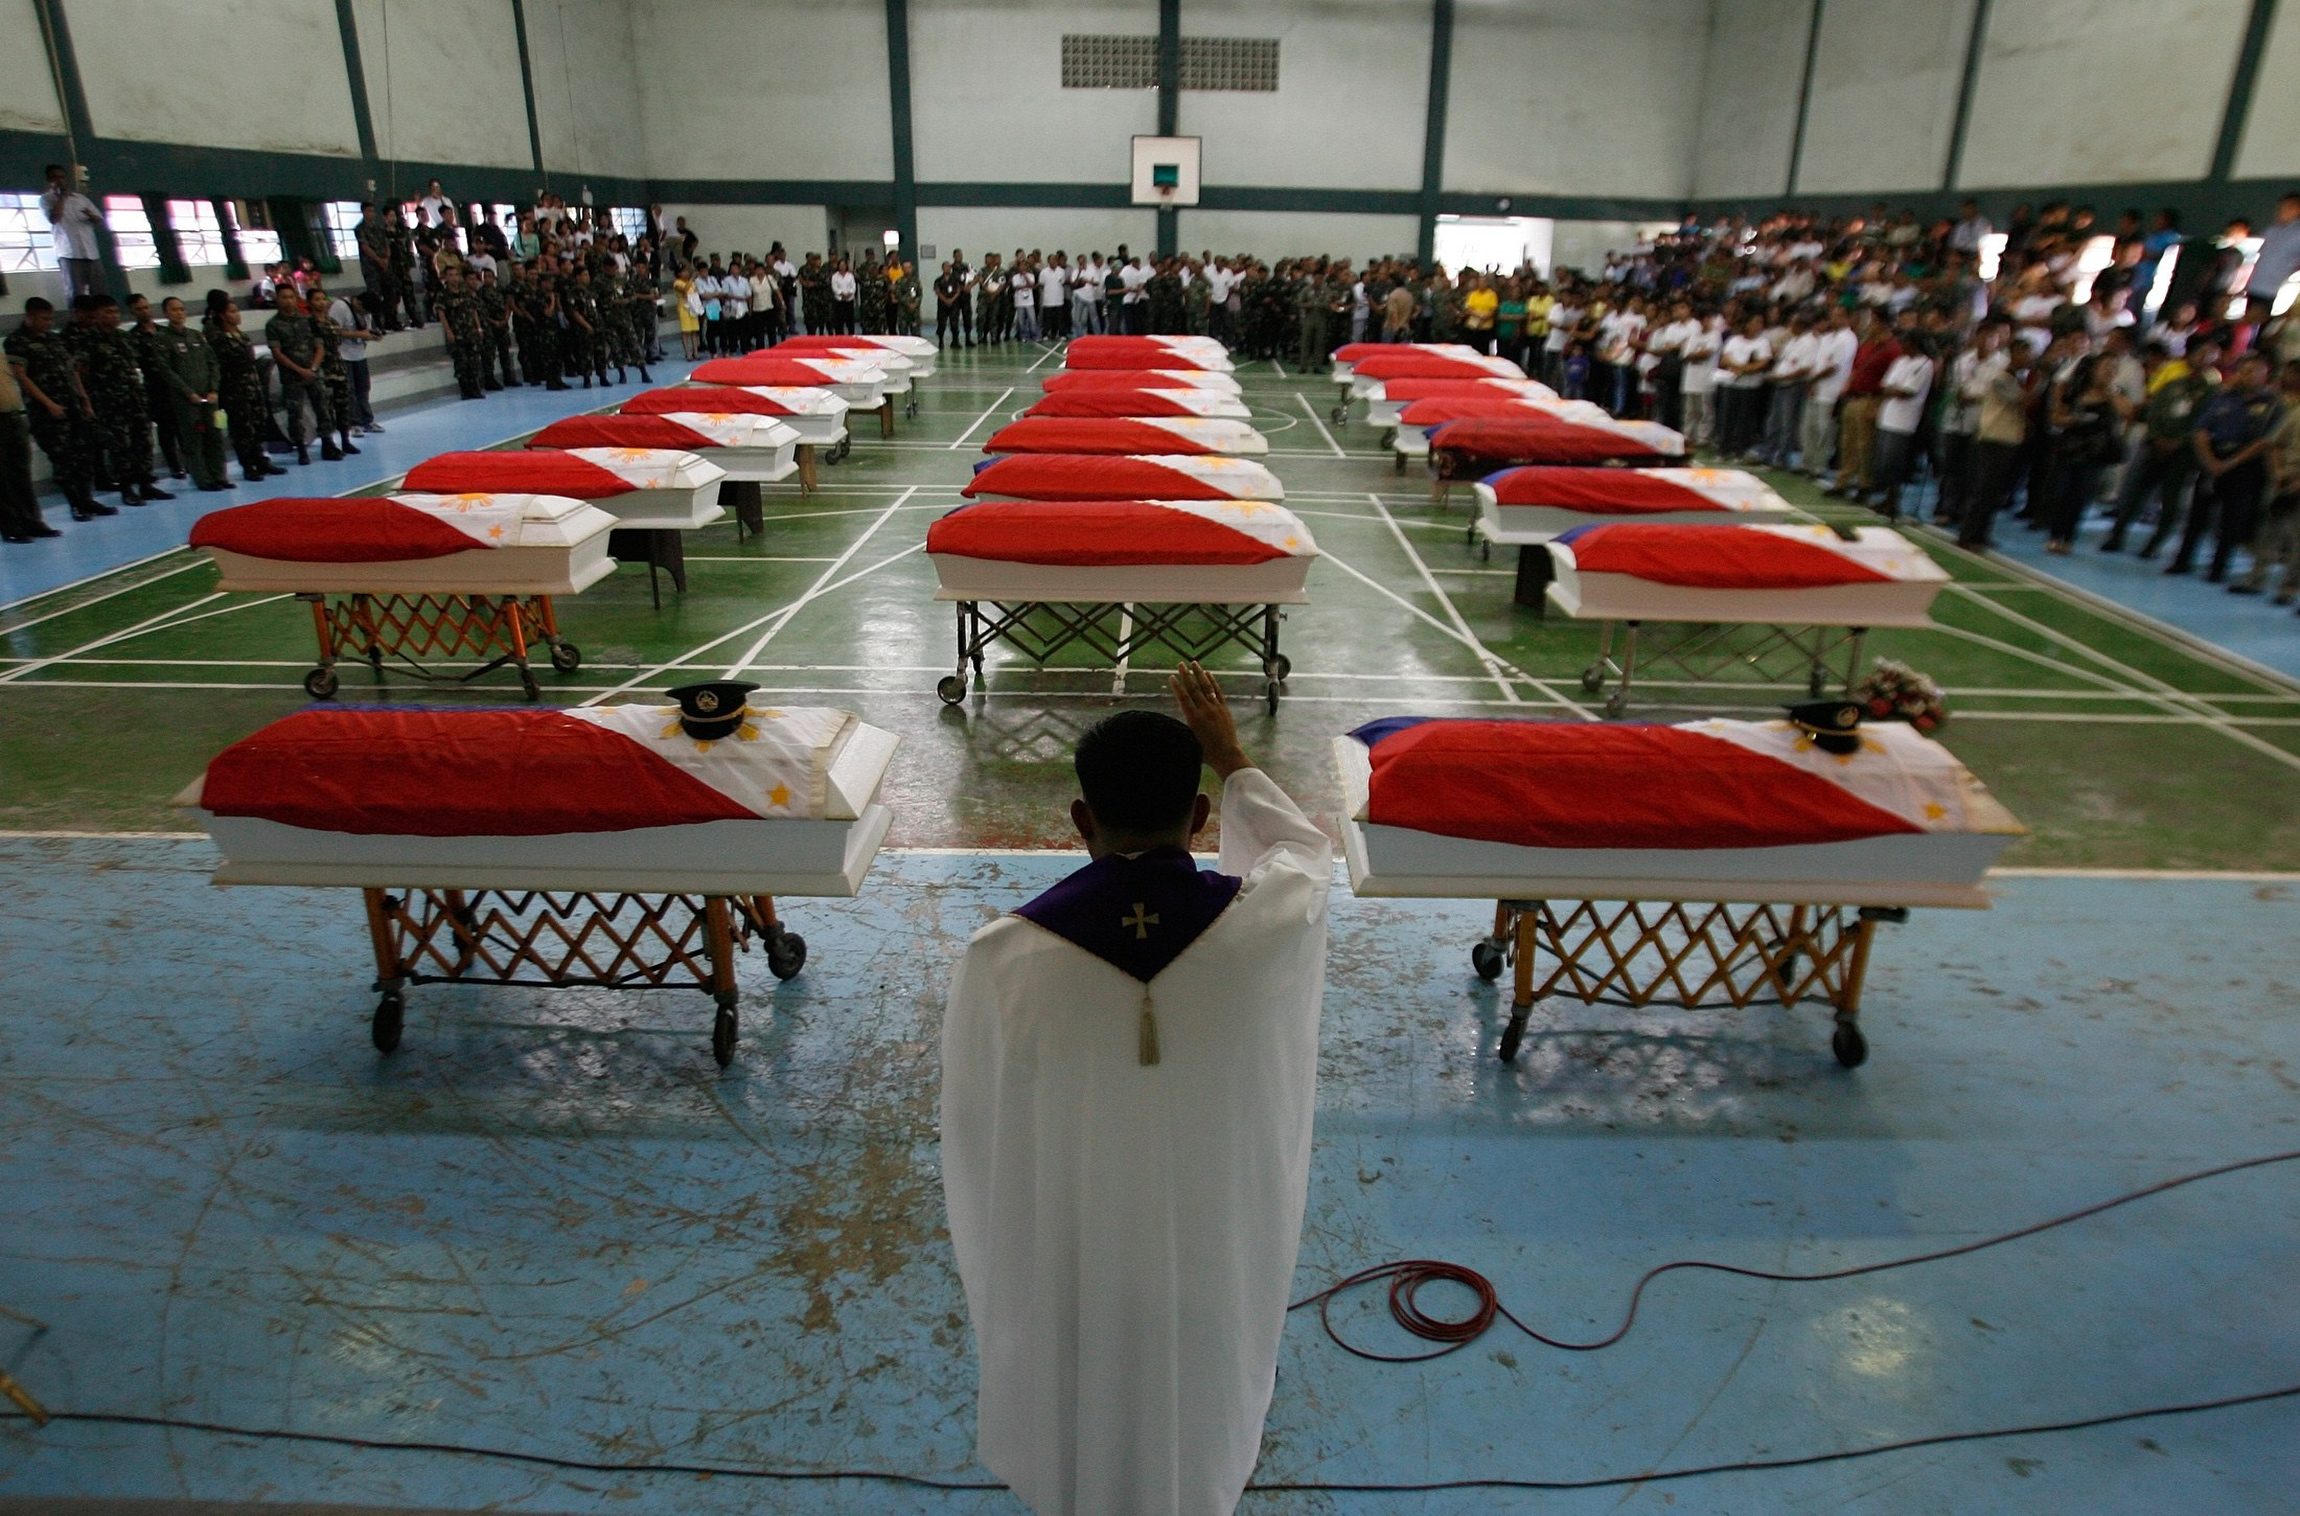 PRIEST LEADS PRAYER SERVICE FOR SOLDIERS KILLED IN BATTLE AGAINST REBELS IN PHILIPPINES